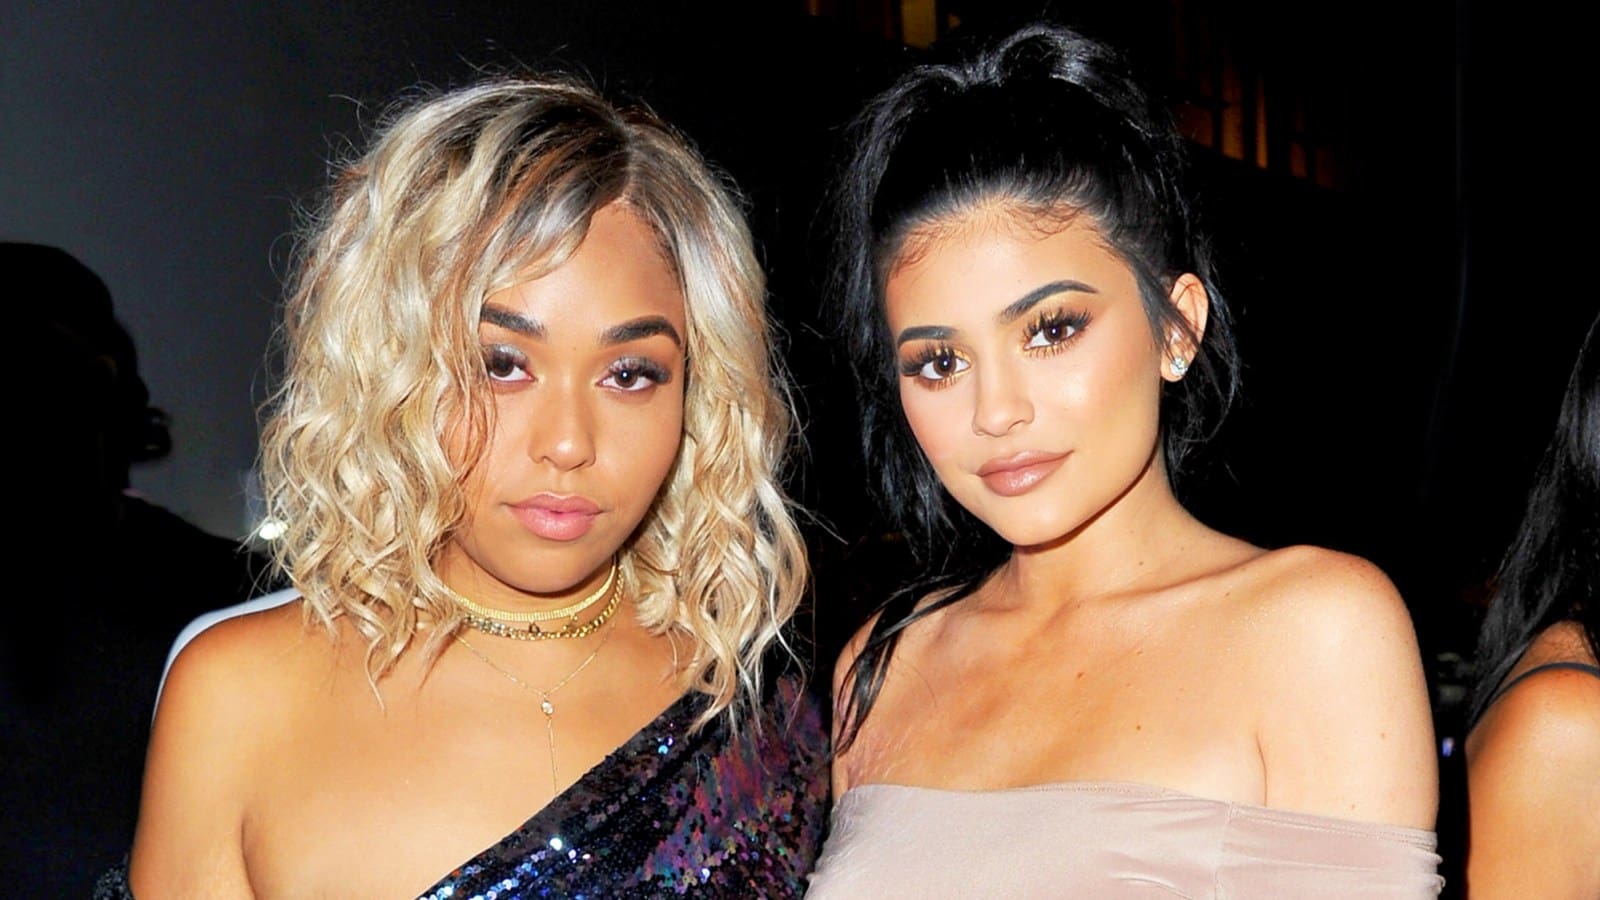 Kylie Jenner Slashes Prices Of Jordyn Woods Makeup Collab By 50% And Hides From The Press - See The Photo